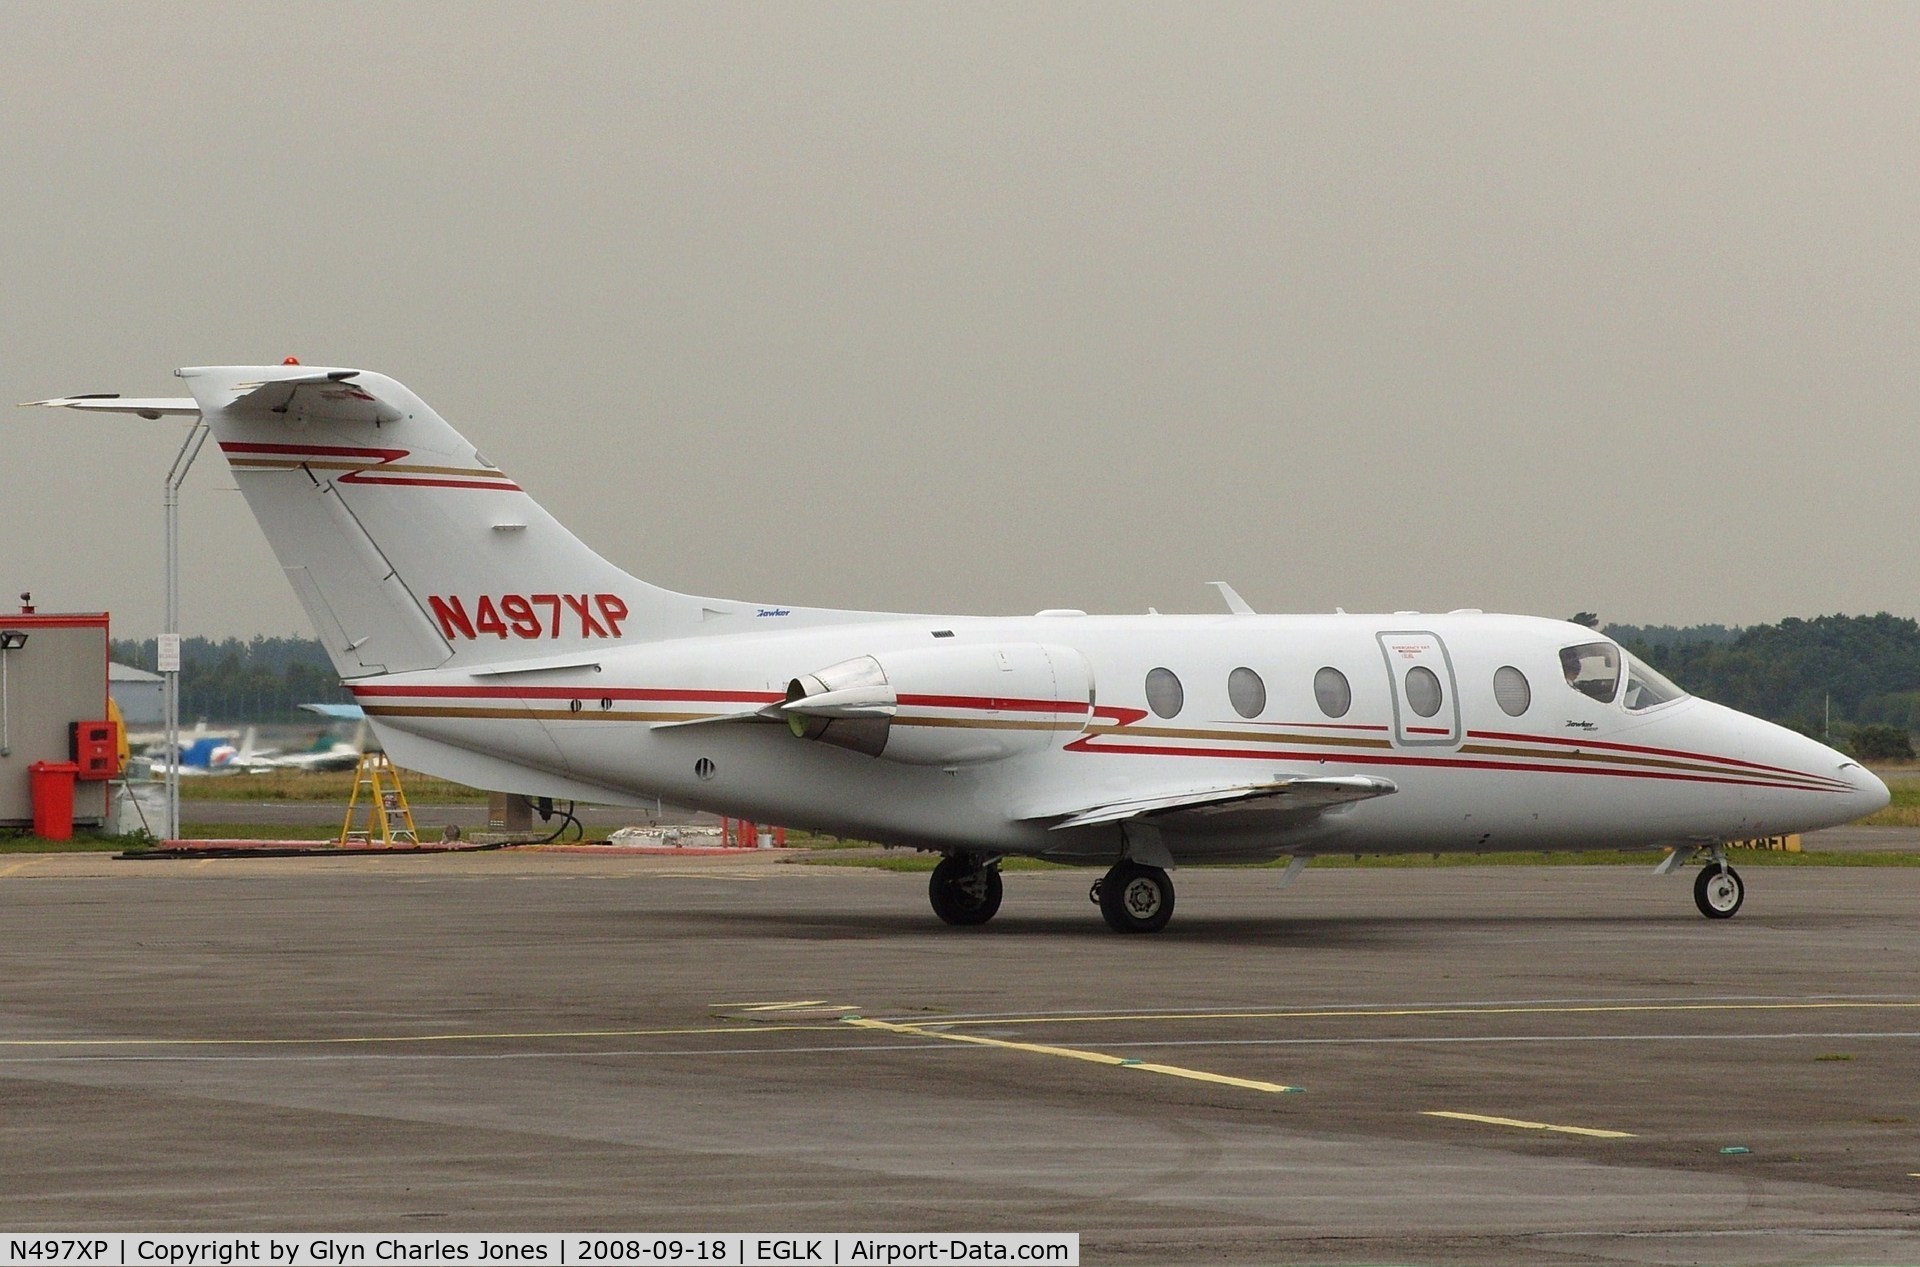 N497XP, 2006 Raytheon 400A BeechJet C/N RK-497, Very quick turnaround of about 5 minutes! Built in 2006. Owned by Aircraft Guarantee Management and Training Inc.